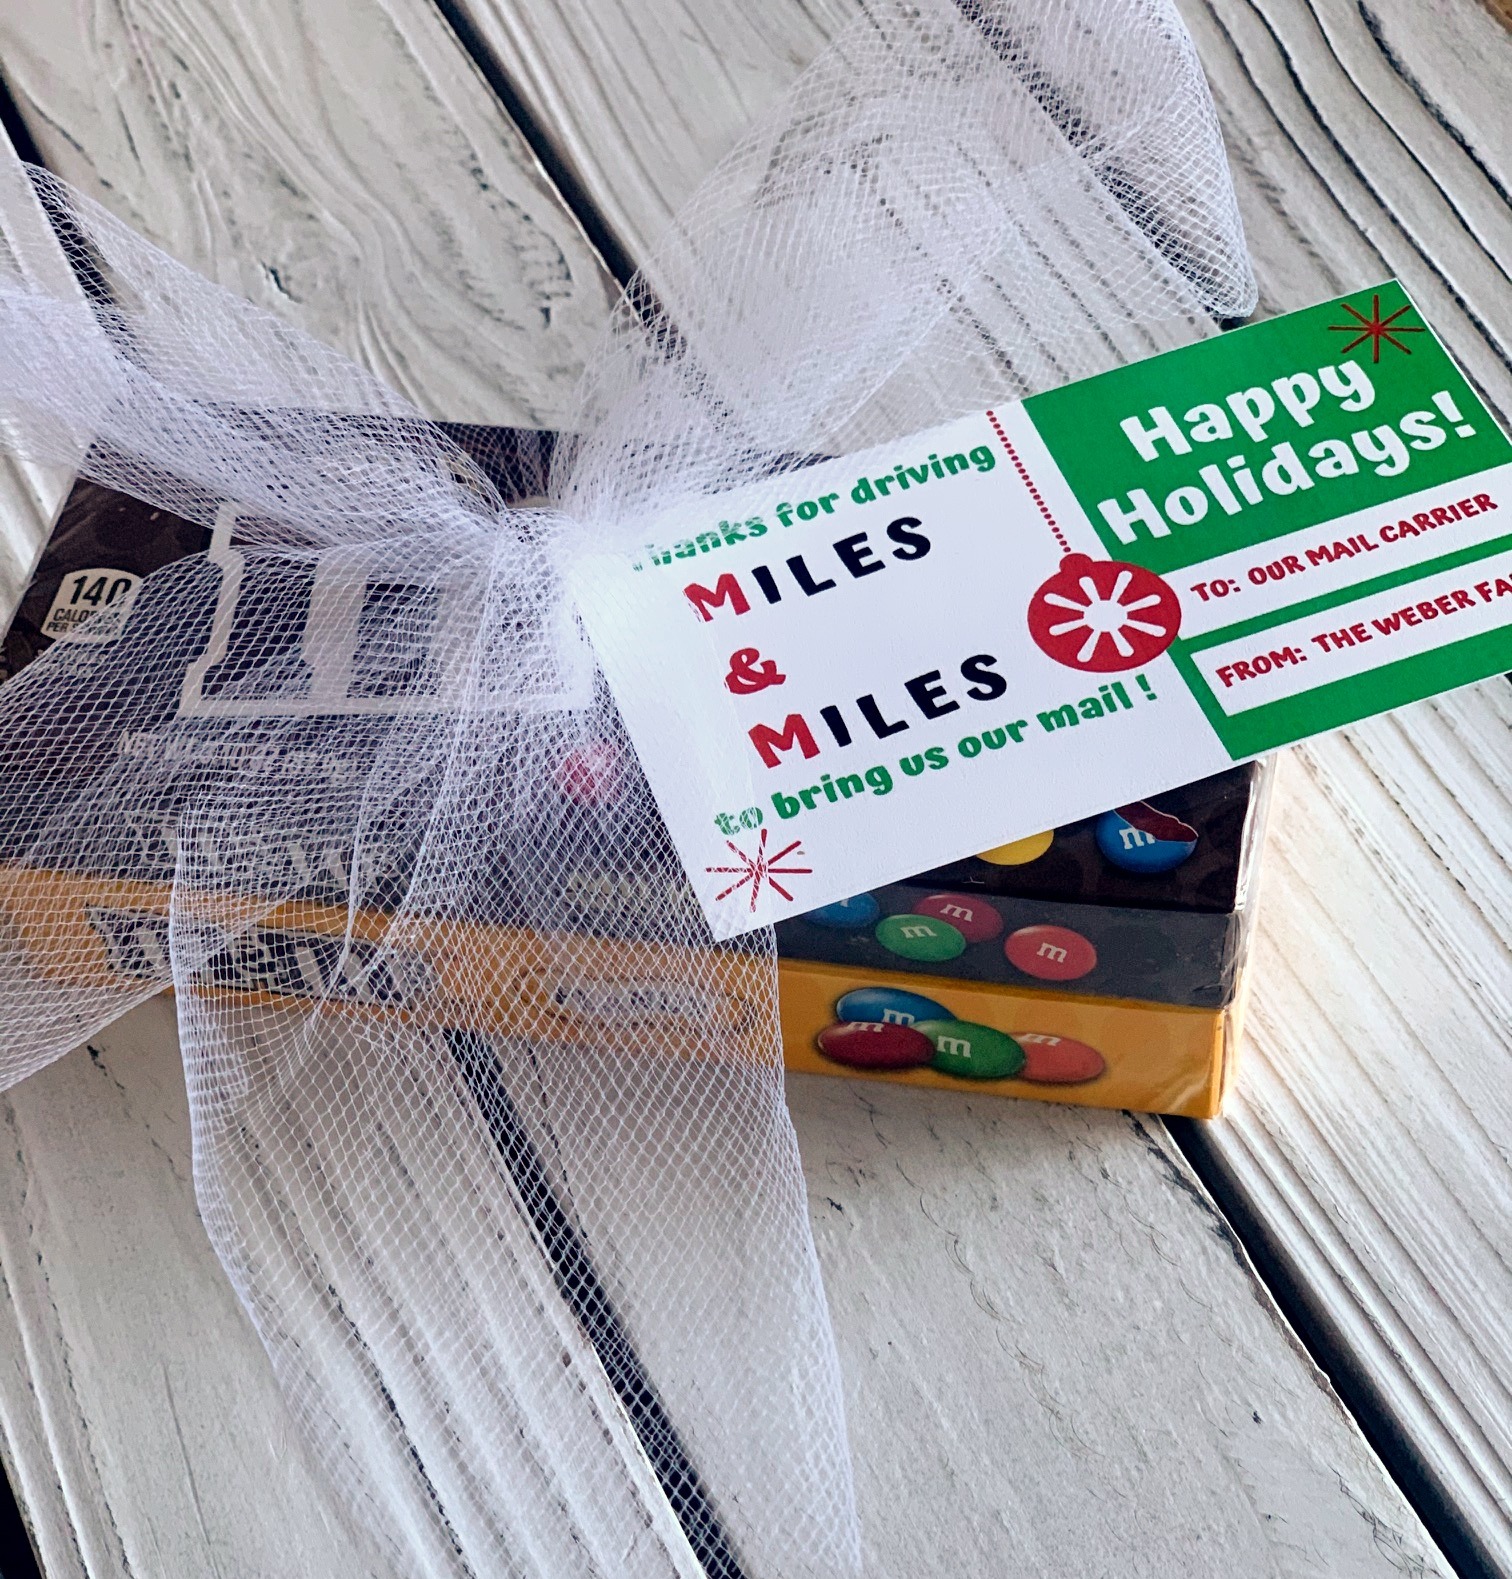 M&M candy gift with tag for mail carrier